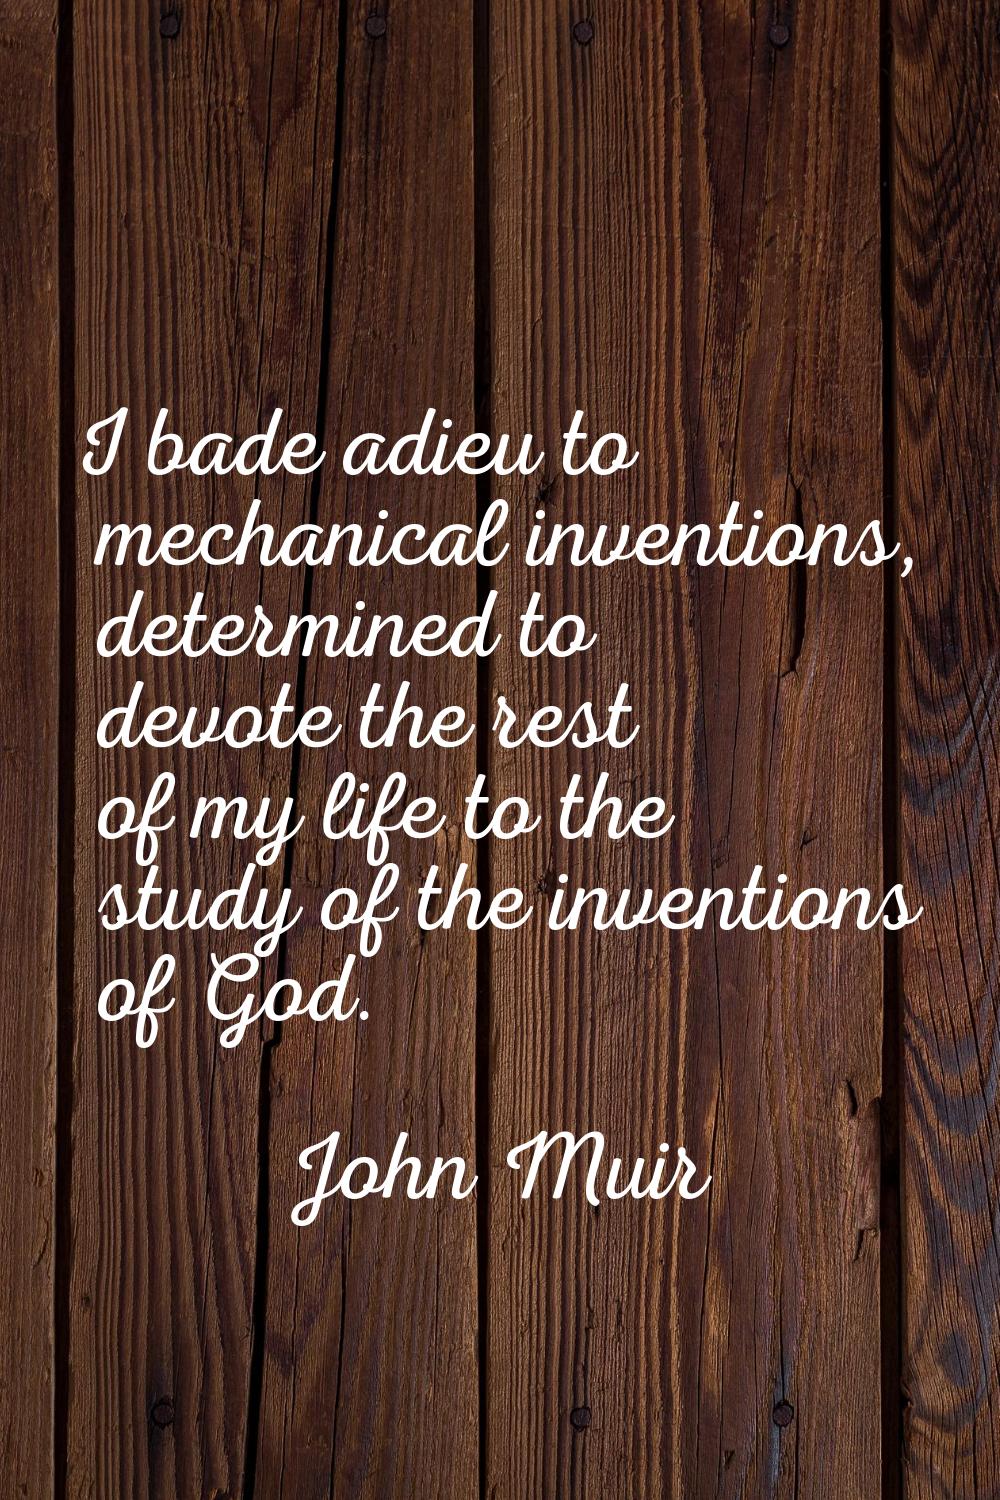 I bade adieu to mechanical inventions, determined to devote the rest of my life to the study of the